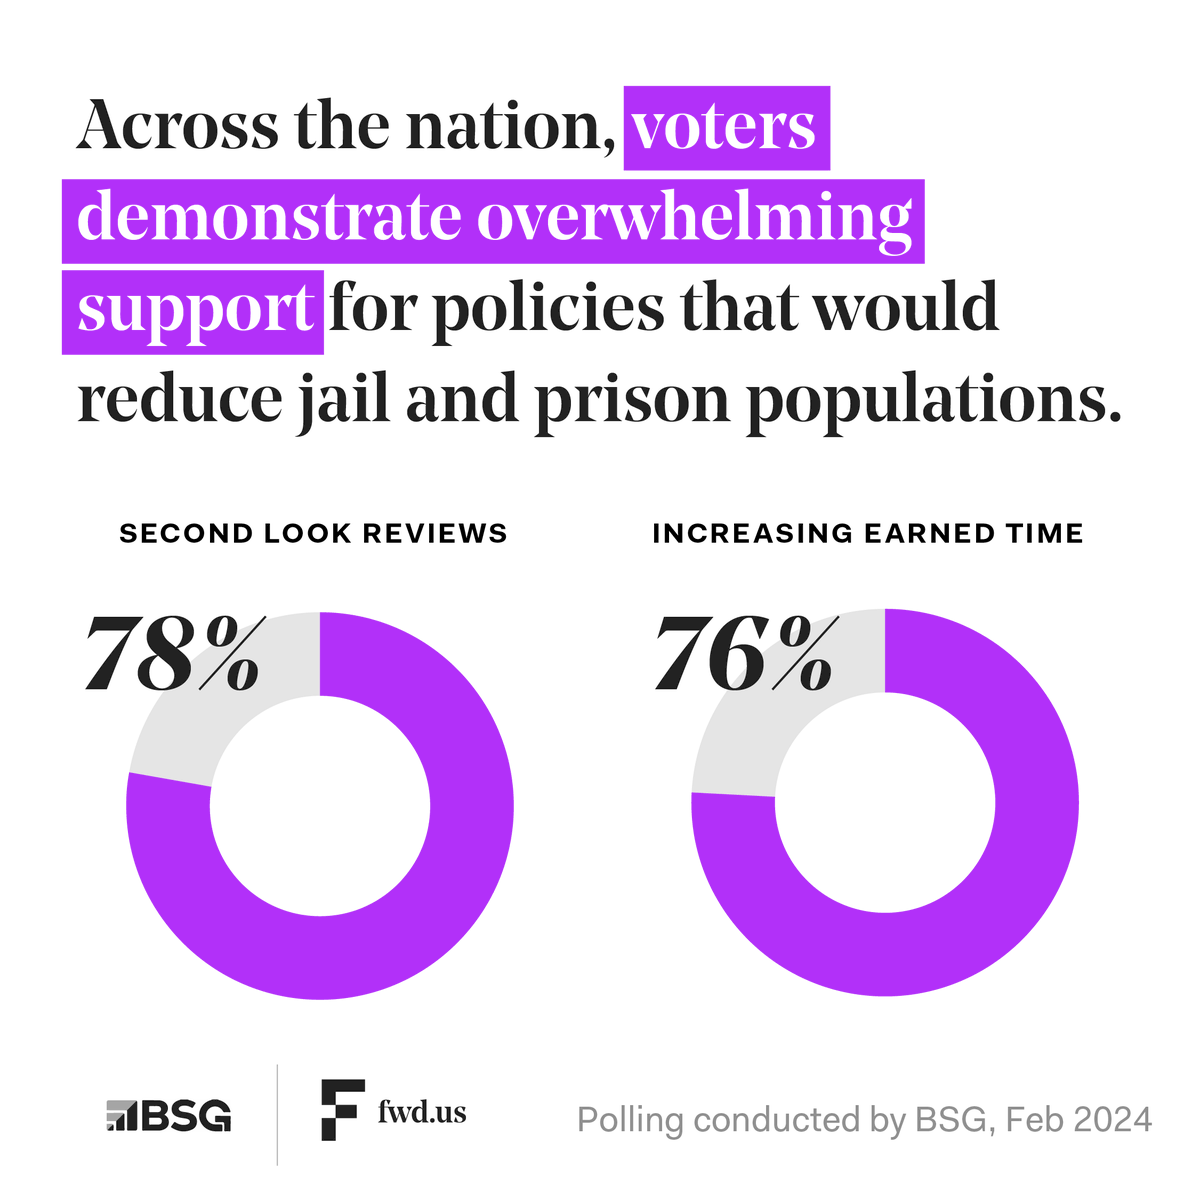 National polling shows strong support for second look & earned time policies. NY lawmakers should prioritize passing these crucial reforms before the session ends. These policies will help formerly incarcerated people rejoin the workforce while advancing public safety.